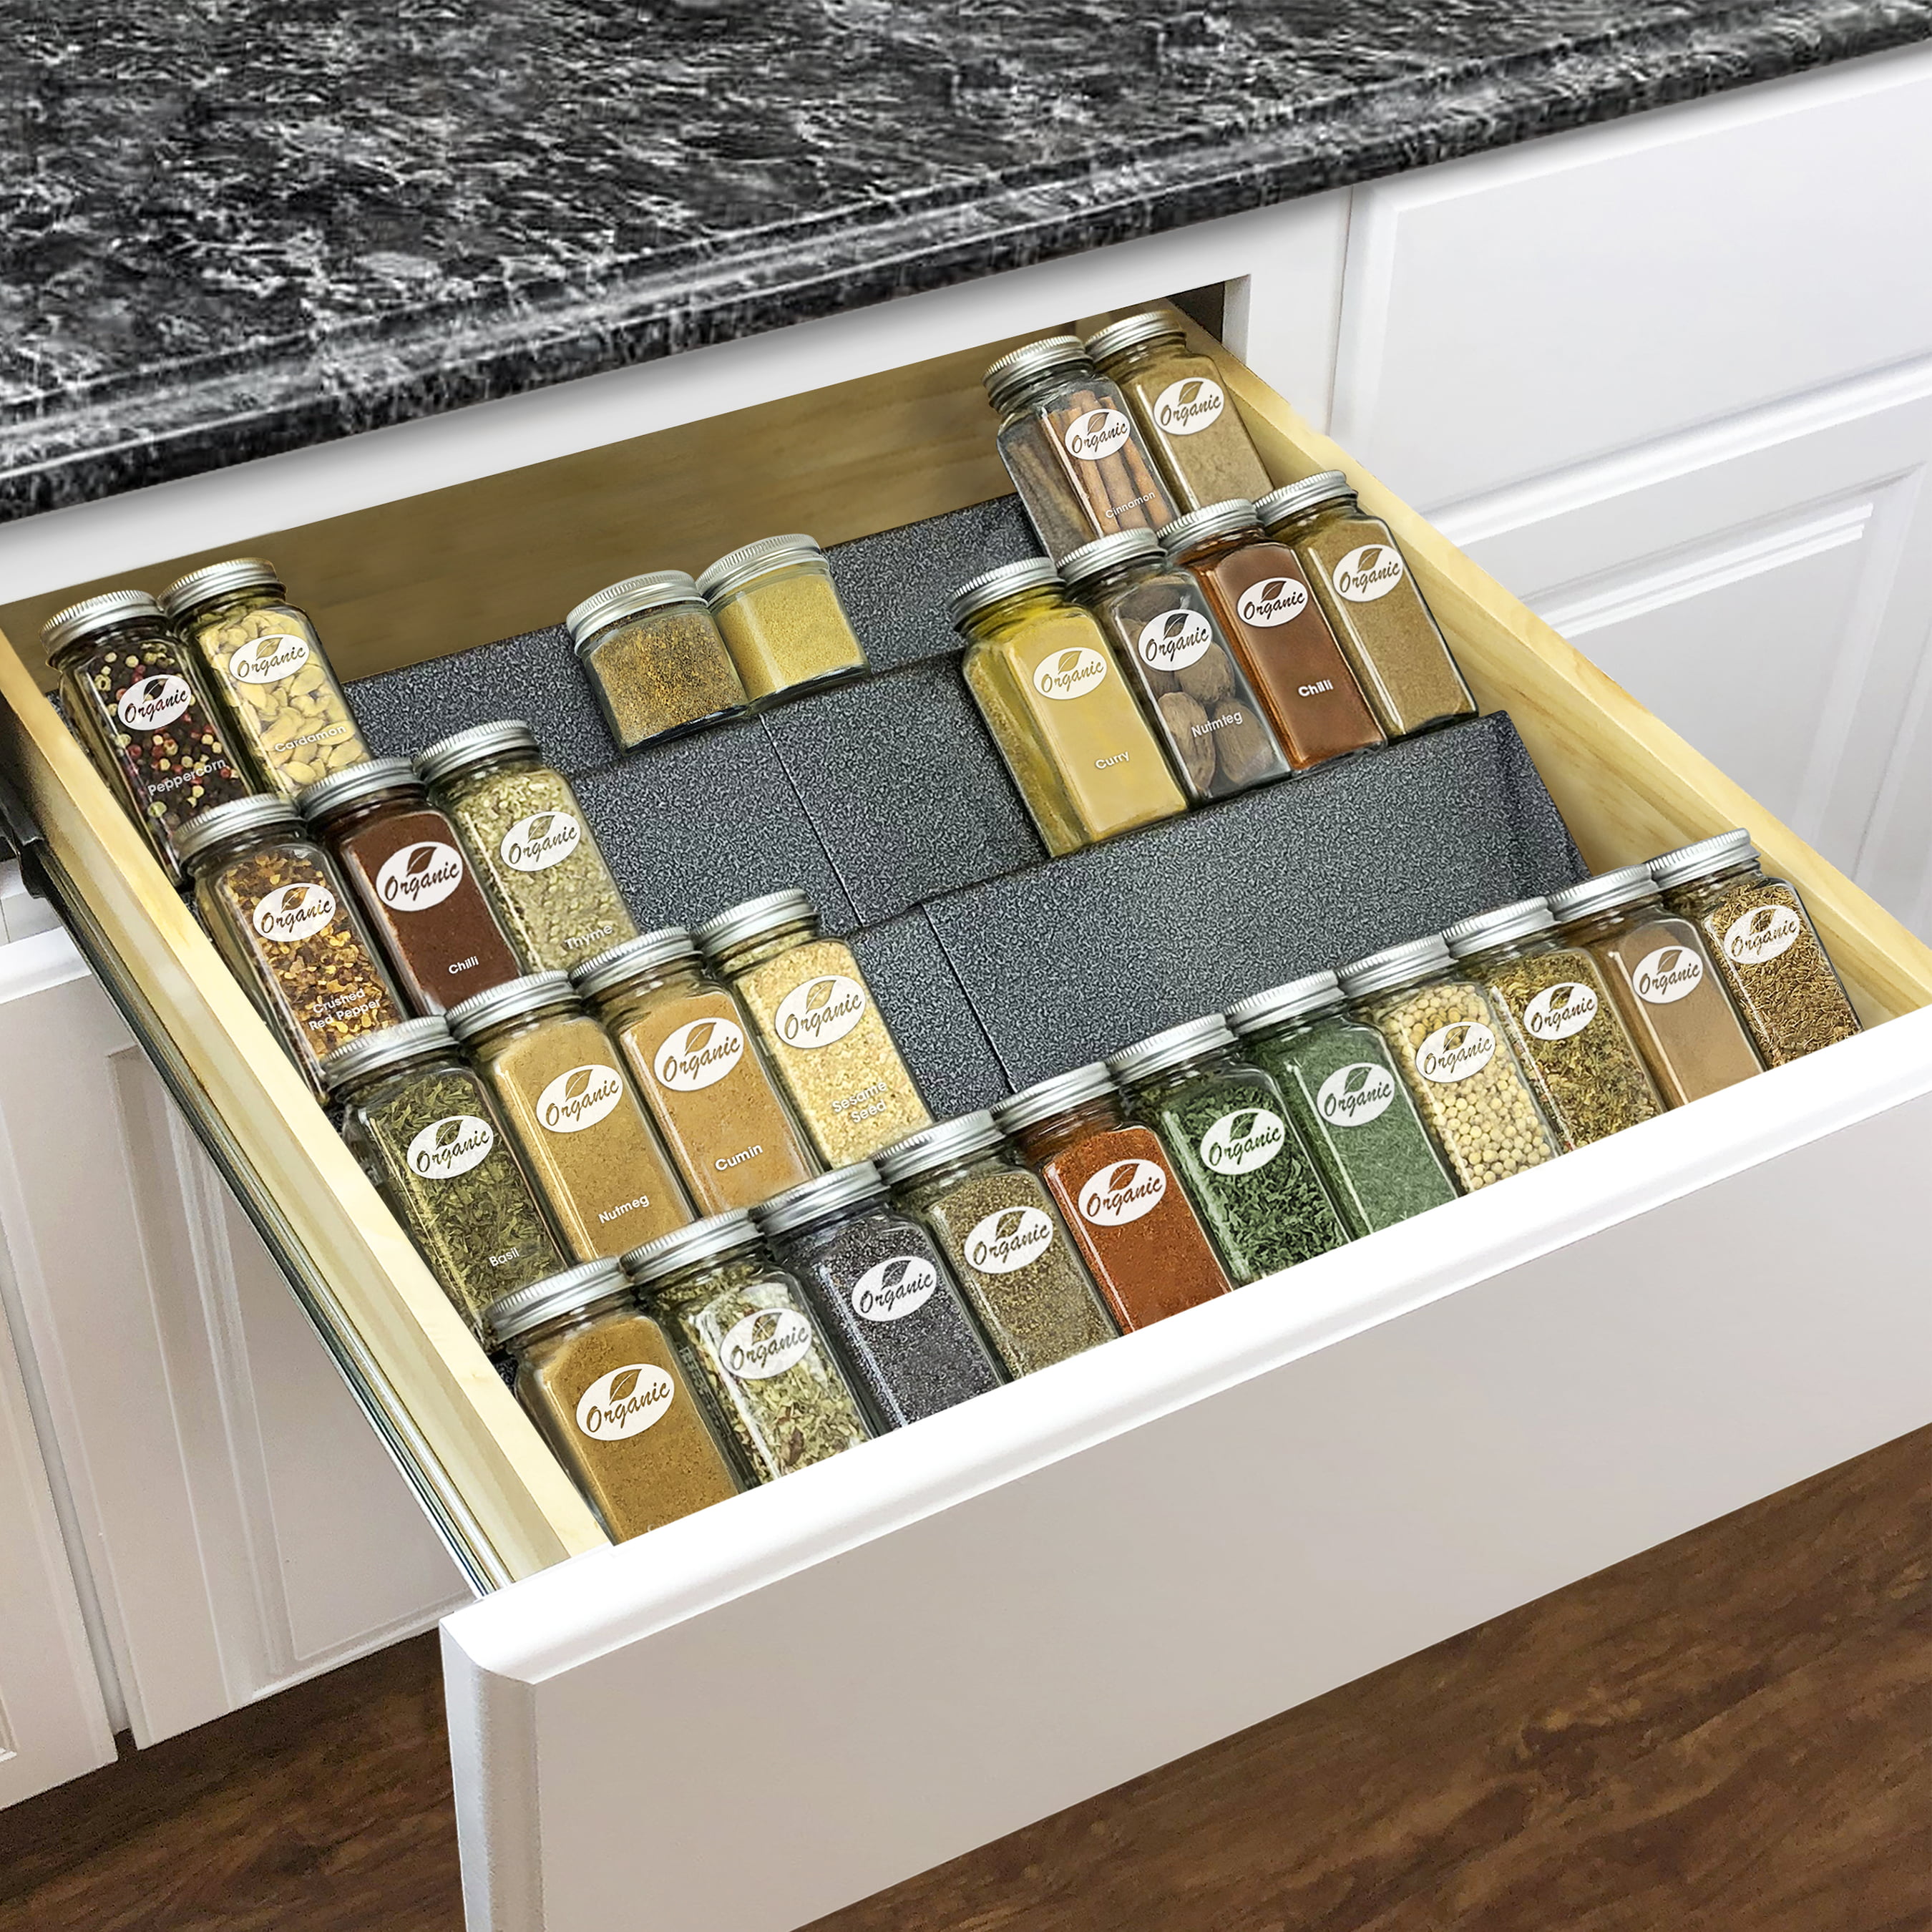 DEWVIE Spice Drawer Organizer, 4 Tier Stainless Steel Spice Rack Organizer  Expandable From 13 to 26 for Cabinet Kitchen Seasoning Jars Drawers